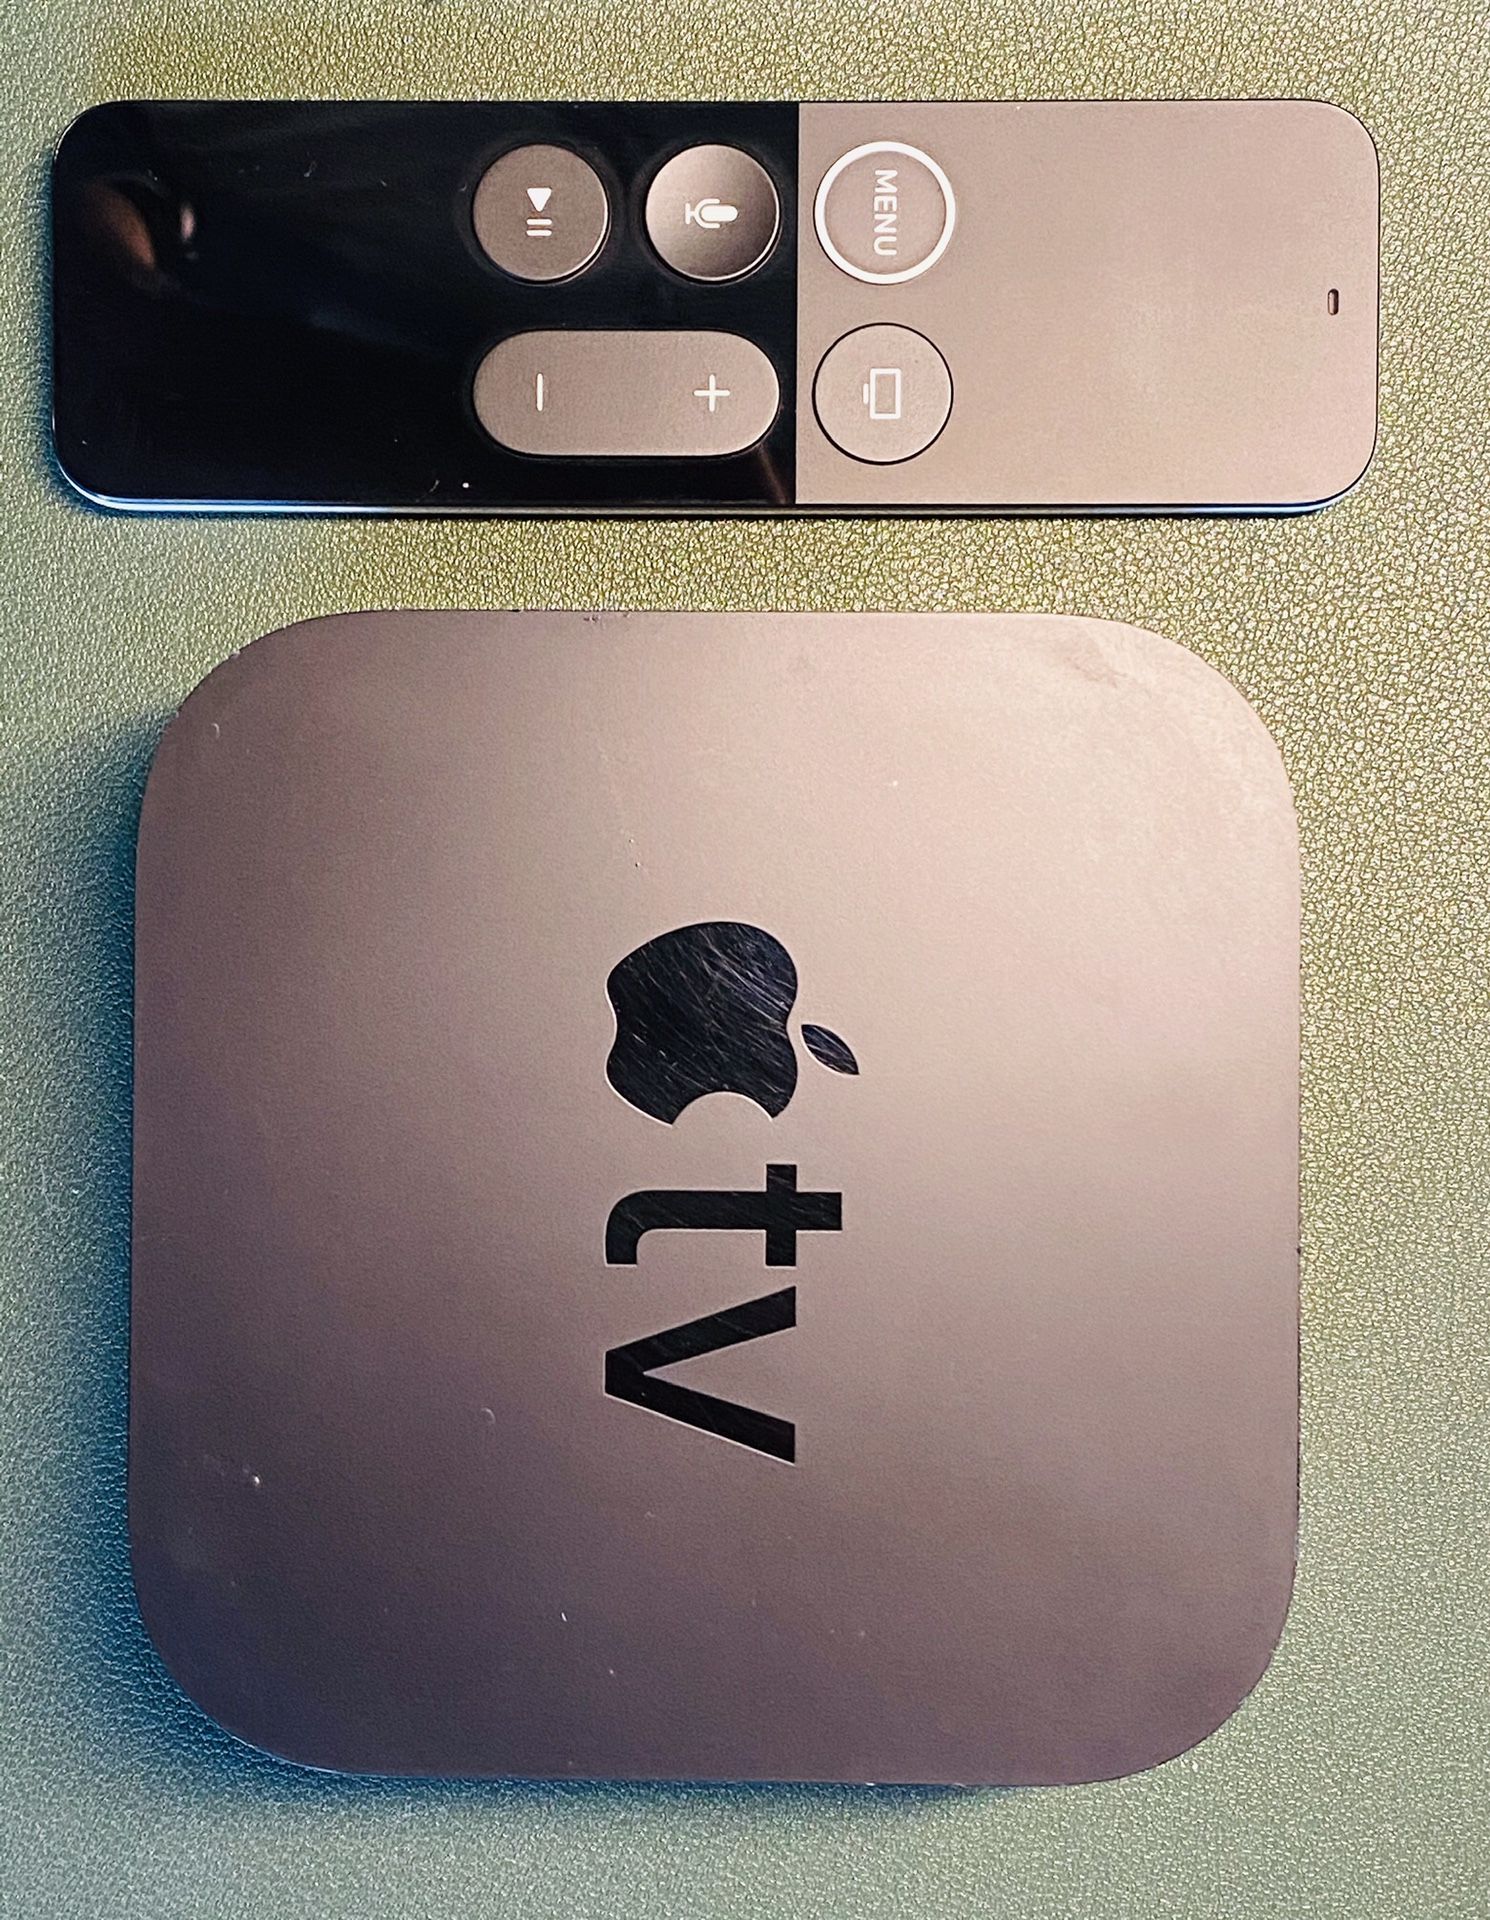 Apple TV 32 GB Full HD with remote